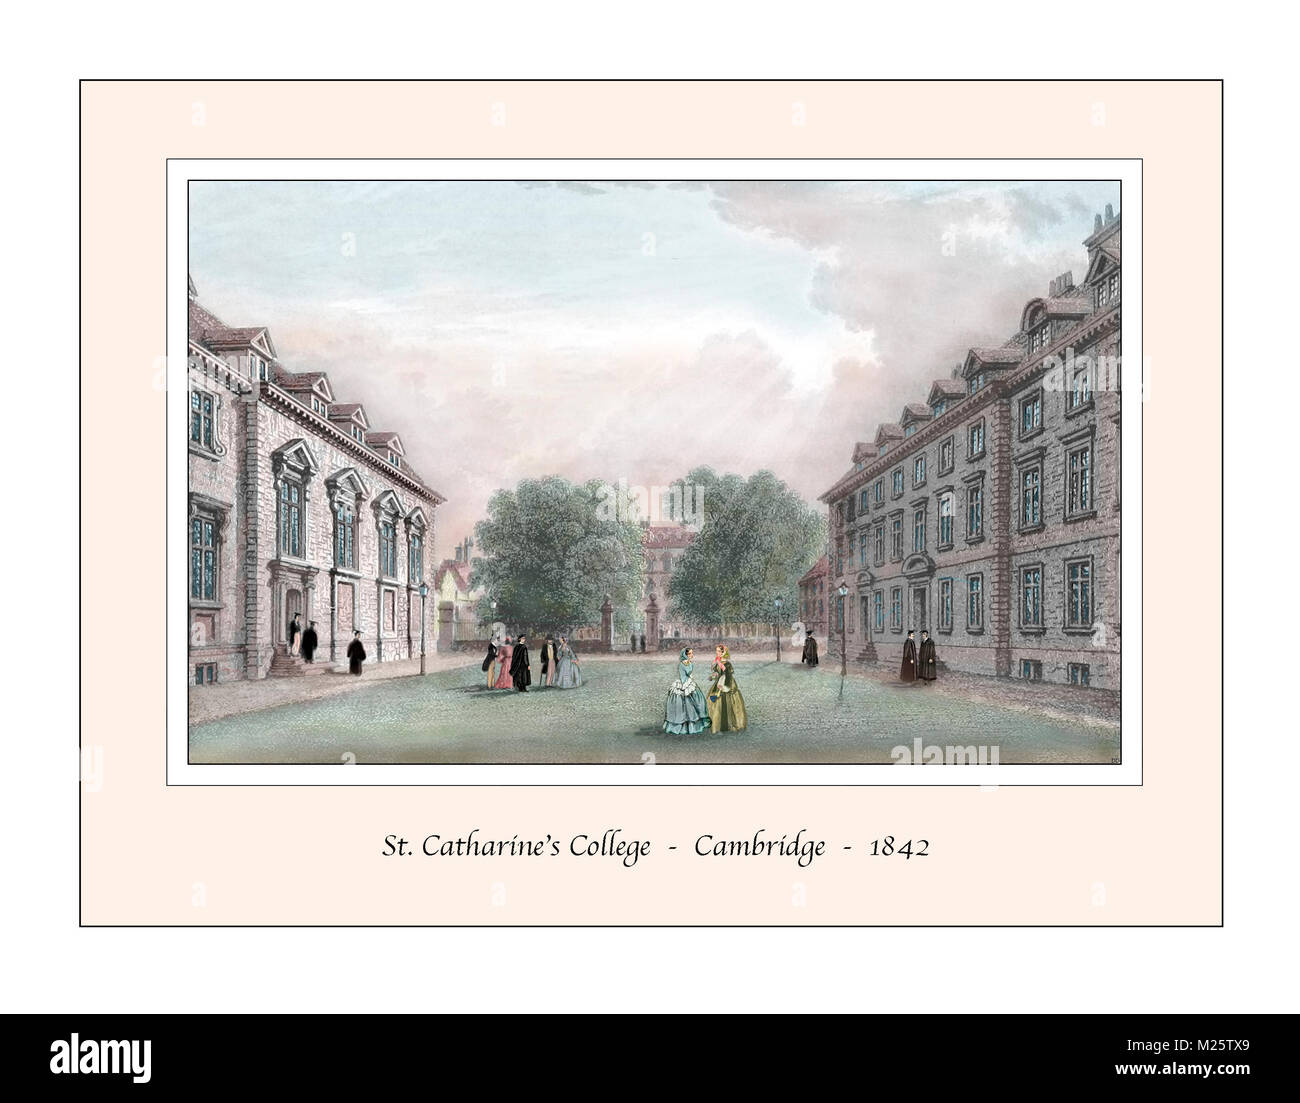 St.Catharine's College Cambridge Original Design based on a 19th century Engraving Stock Photo